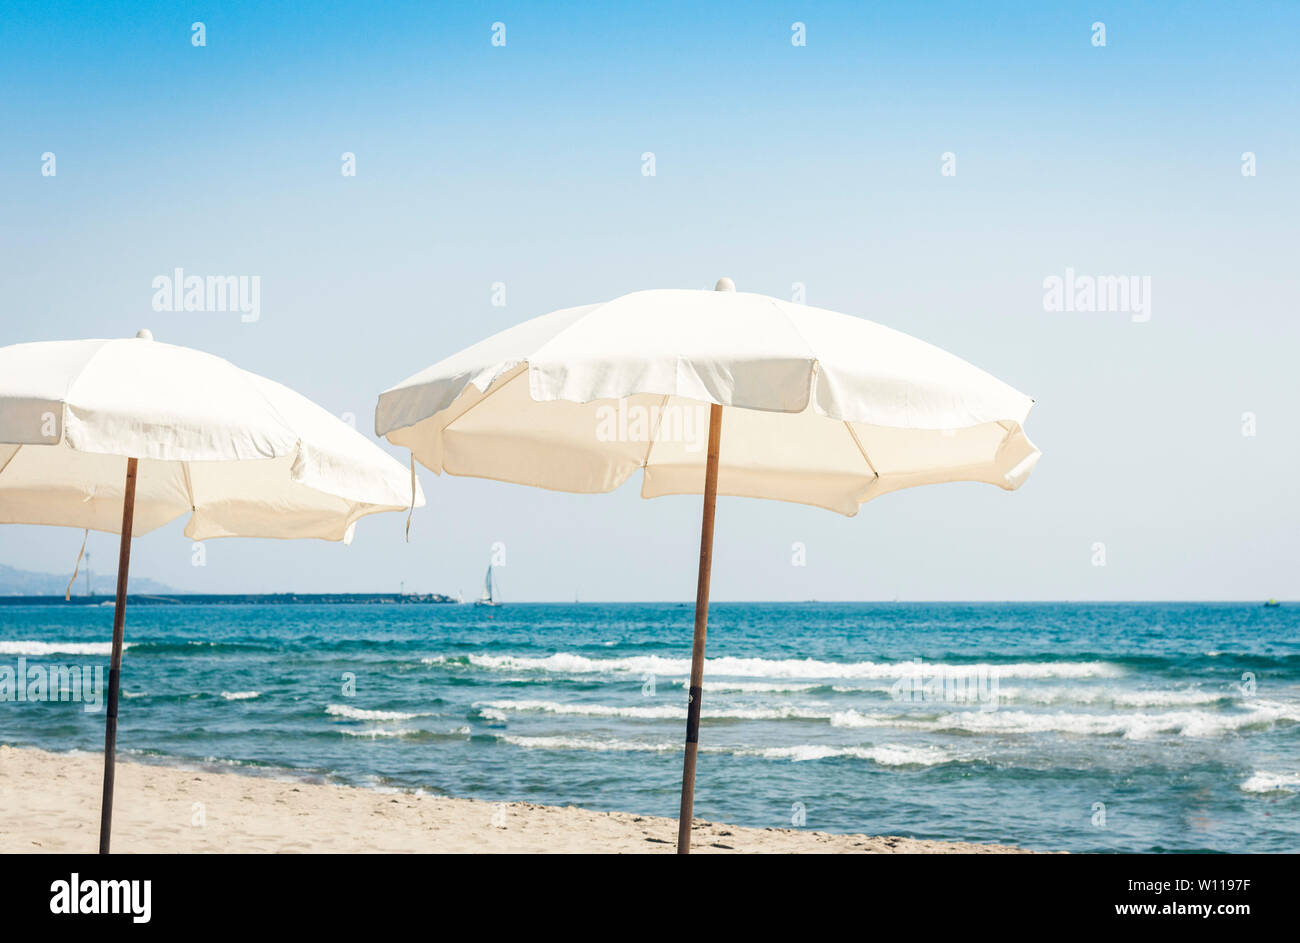 View of the beach of ionic sea near Catania, Sicily, Italy, Lido Cled with white umbrellas . Stock Photo